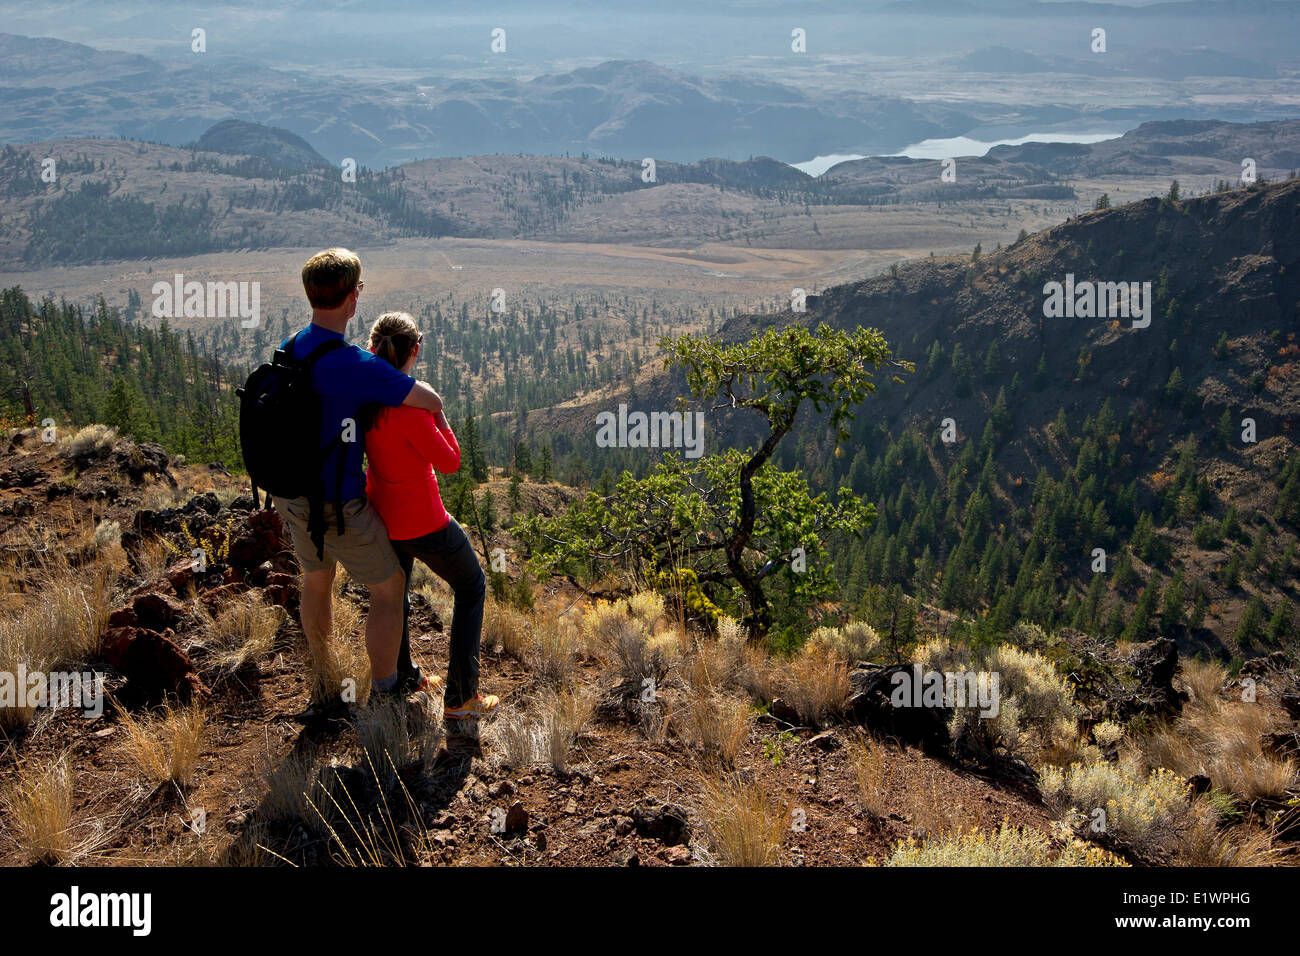 A young couple stop to enjoy the view while hiking the Dewdrop trail in the Lac du Bois protected grasslands above Kamloops Stock Photo